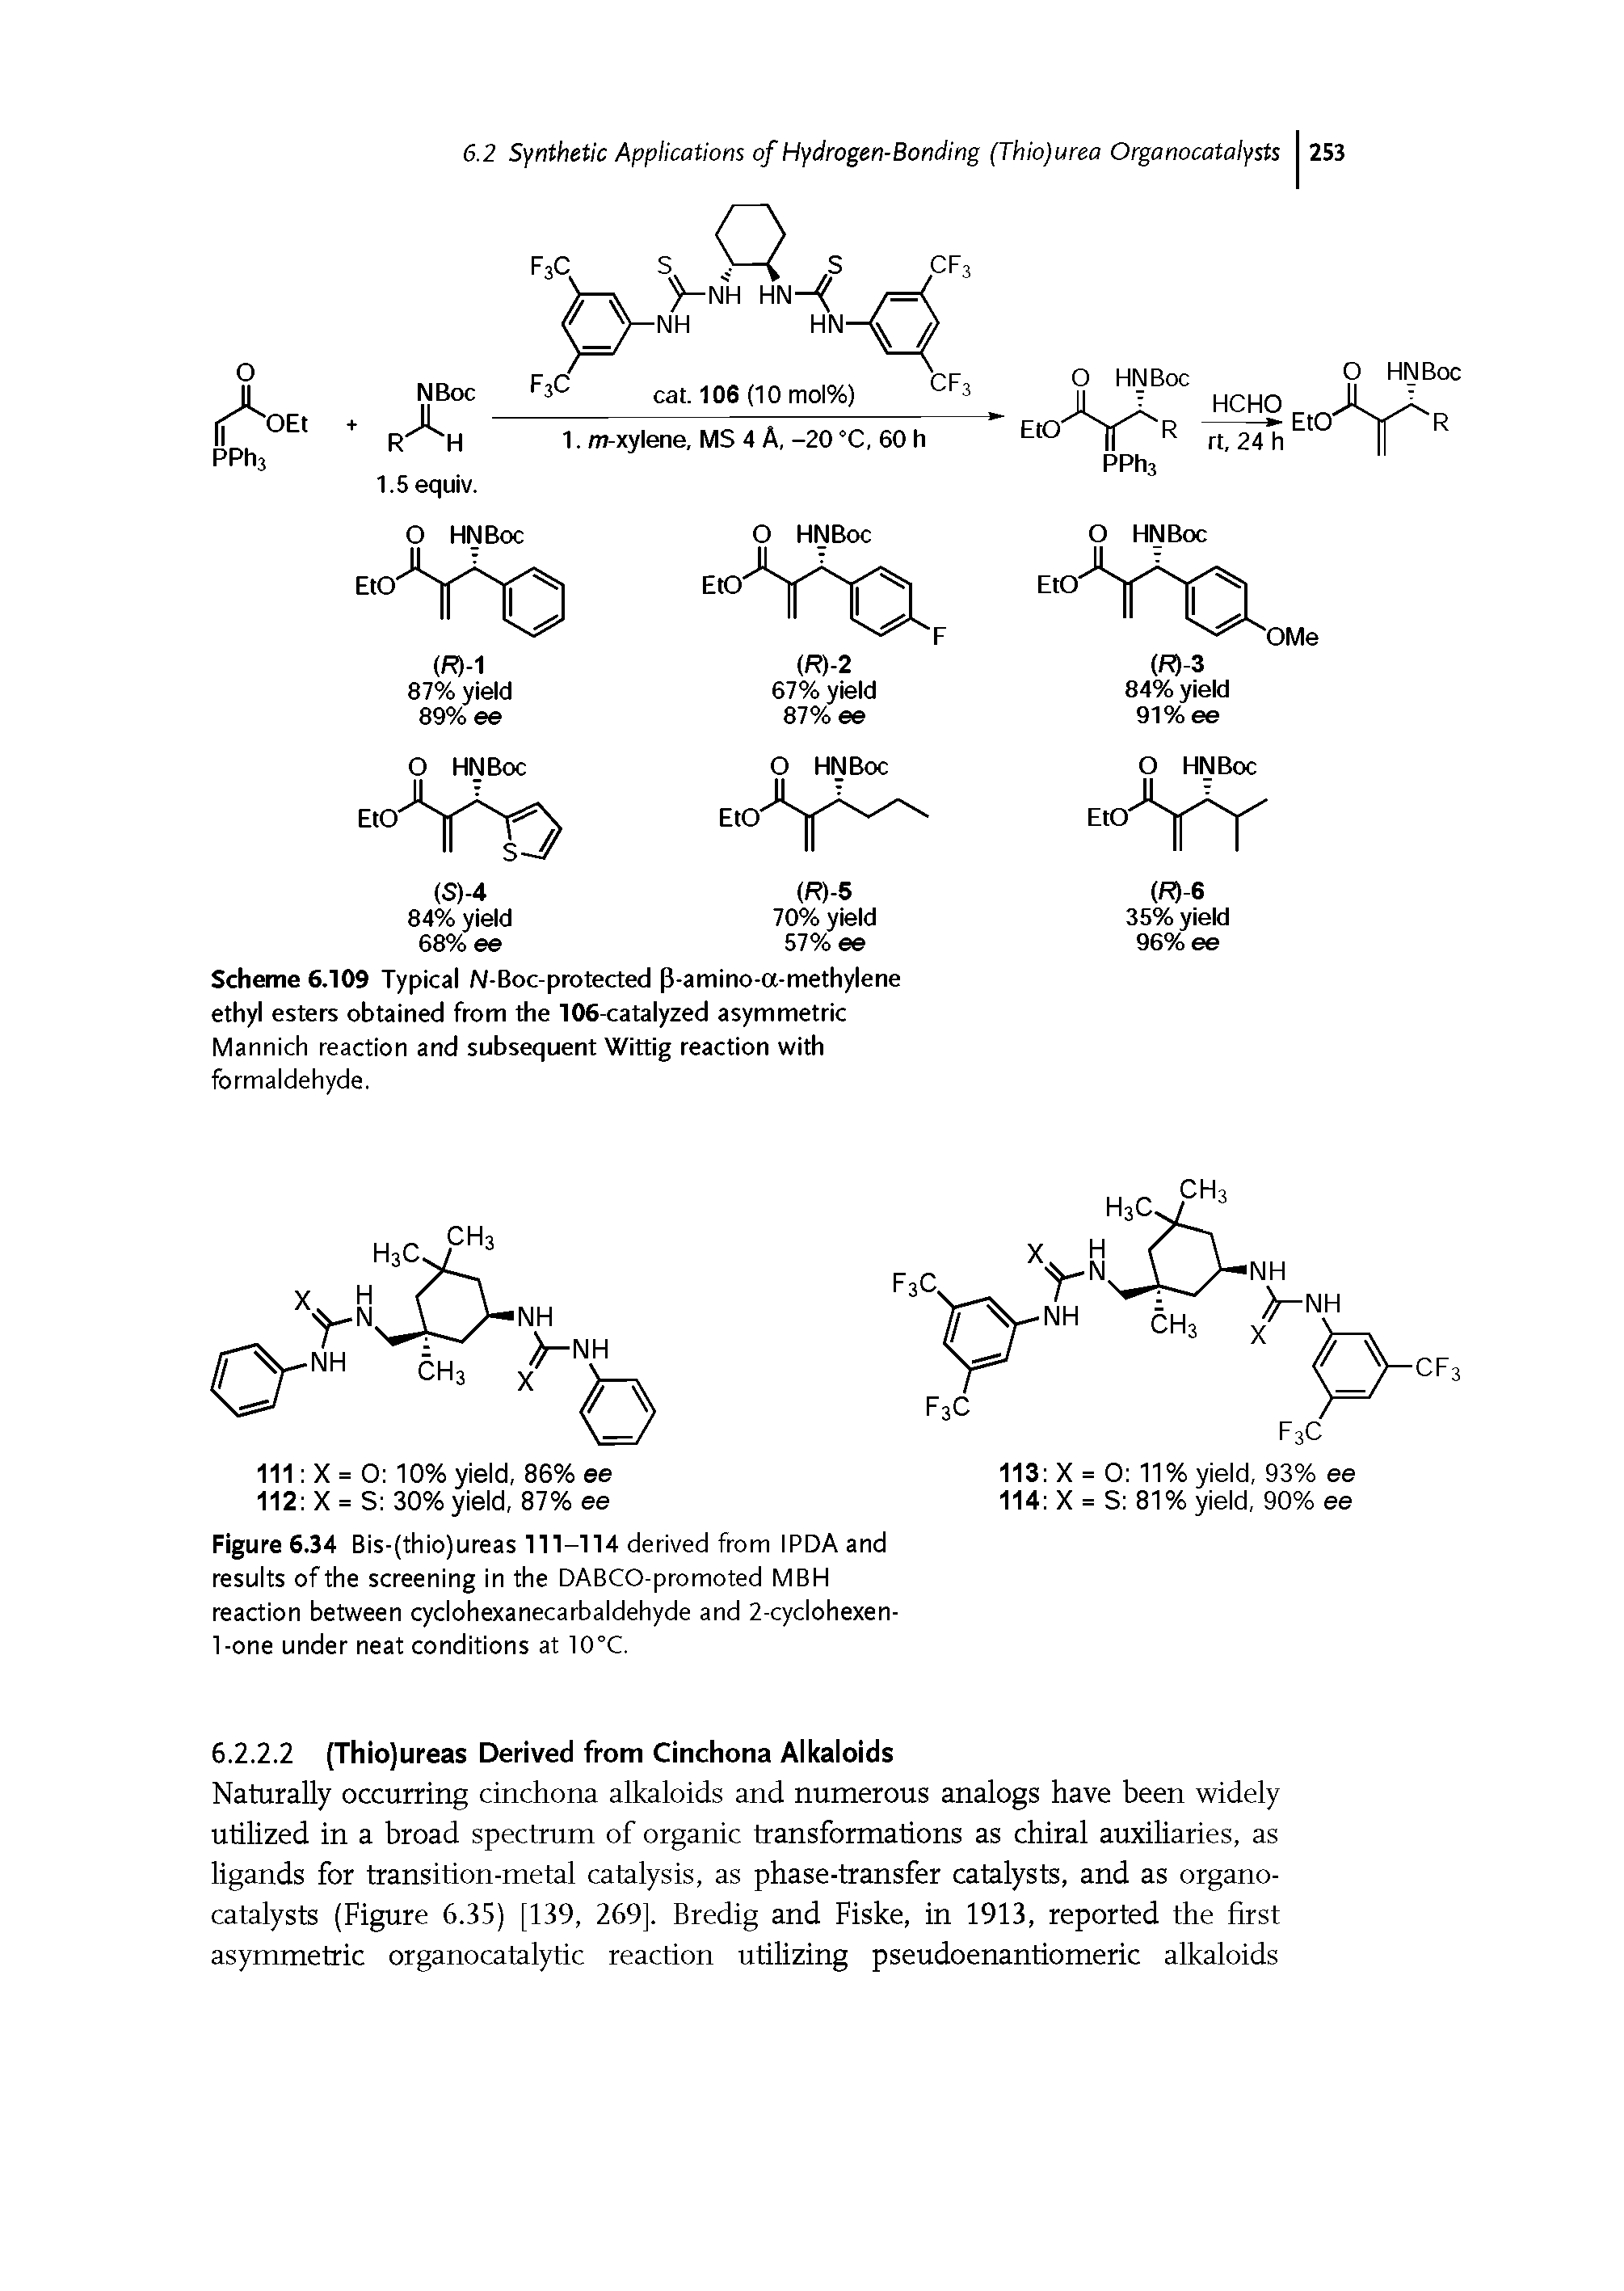 Scheme 6.109 Typical N-Boc-protected P-amino-a-methylene ethyl esters obtained from the 106-catalyzed asymmetric Mannich reaction and subsequent Wittig reaction with...